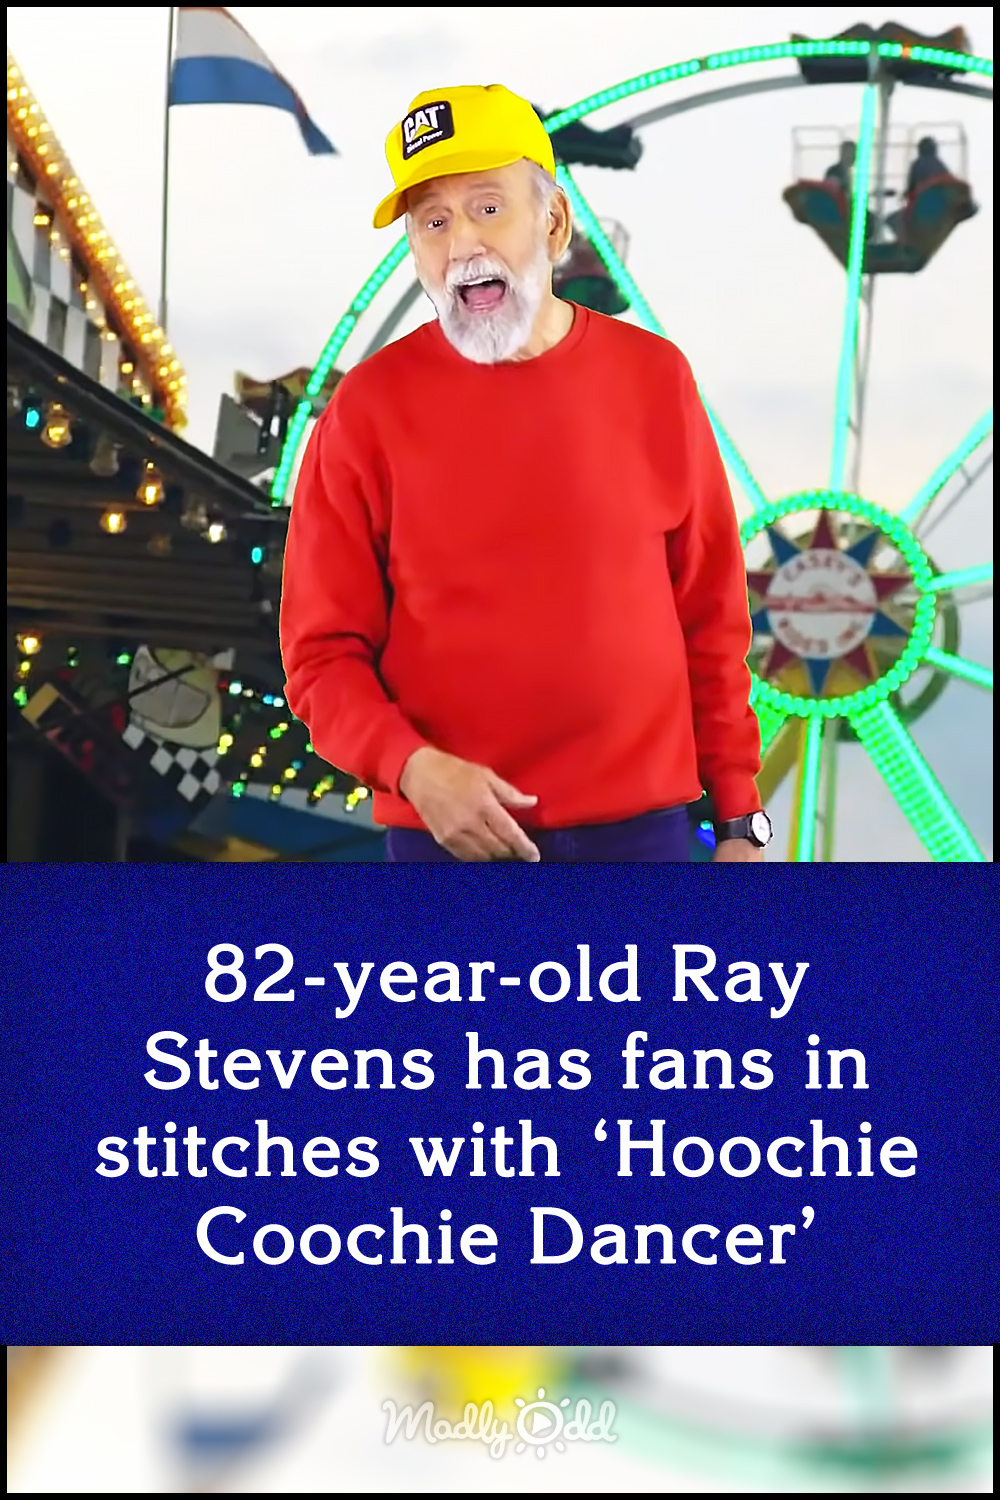 82-year-old Ray Stevens has fans in stitches with ‘Hoochie Coochie Dancer’